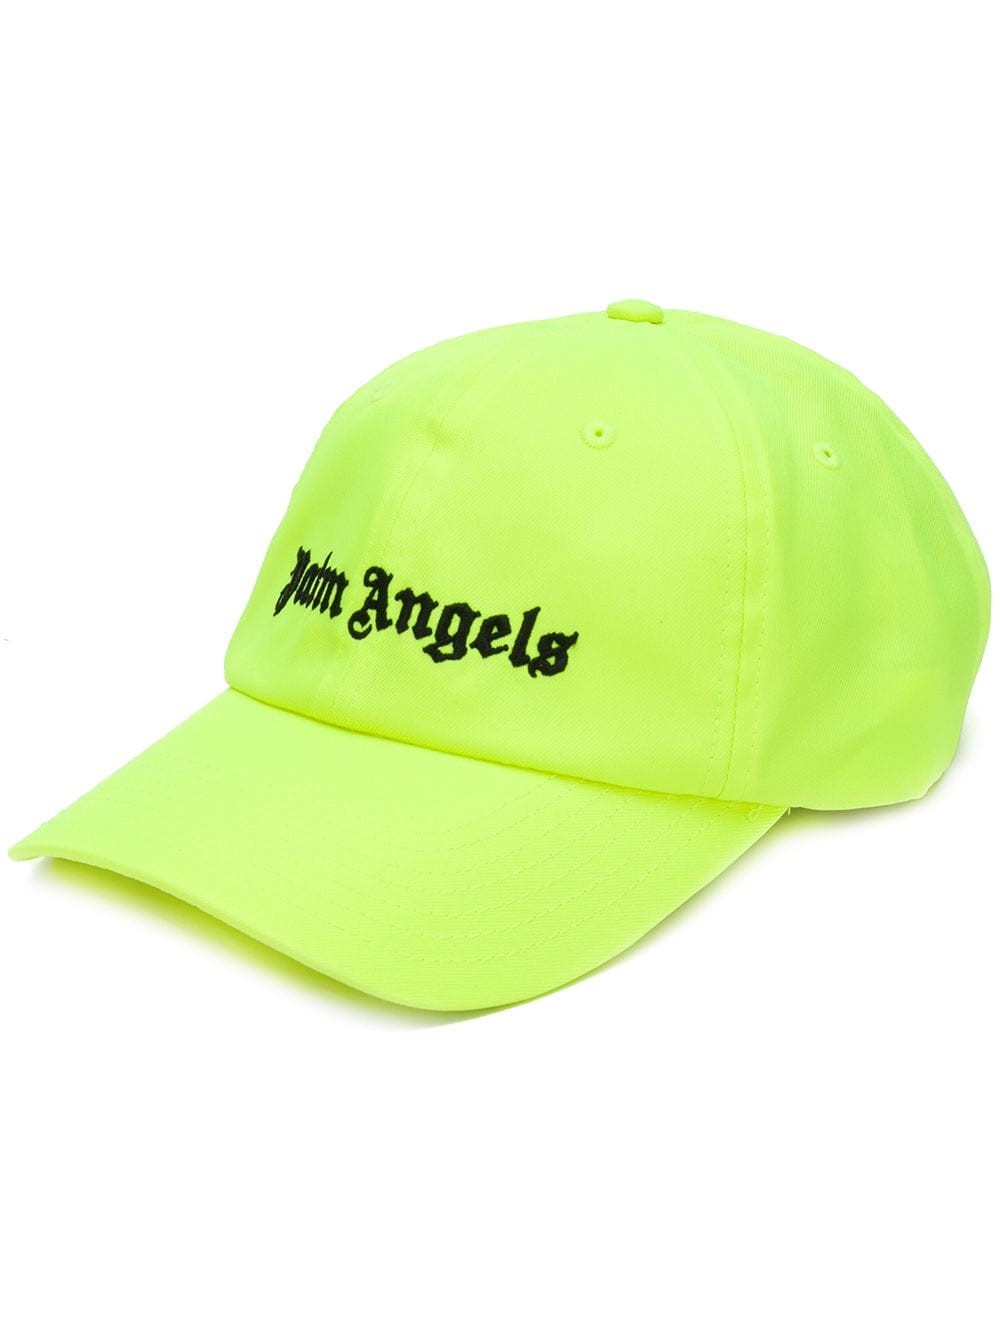 palm angels LOGO BASEBALL CAP available on montiboutique.com - 26286